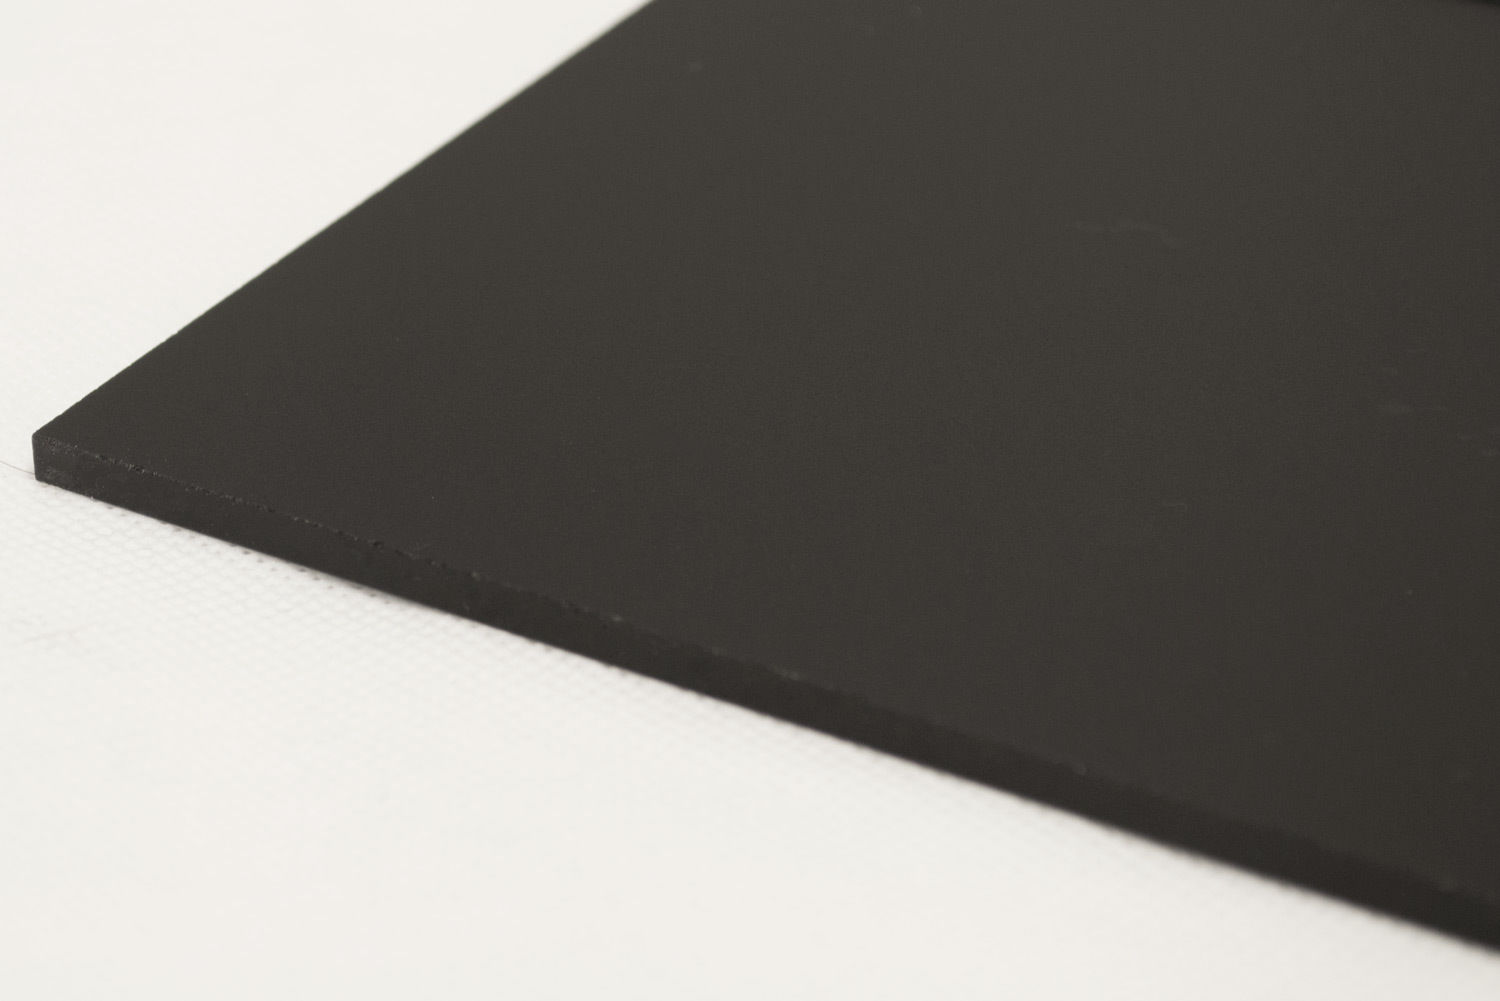 Black Colour Perspex Acrylic Sheet Plastic Material Panel Cut to Size 